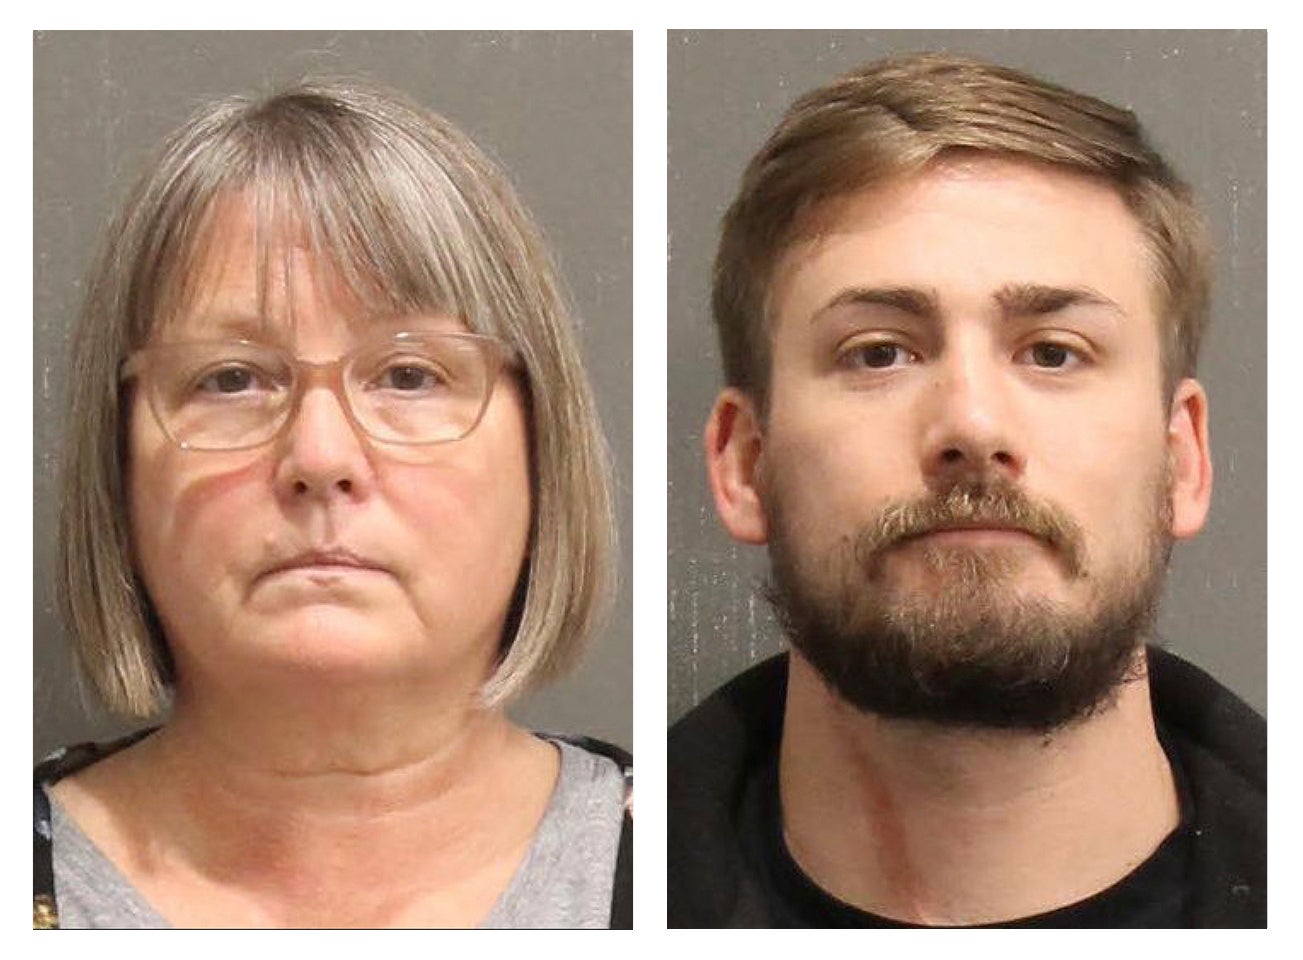 Home confinement for man, mother charged in Capitol riot Georgia Tennessee Nashville Senate The Independent image